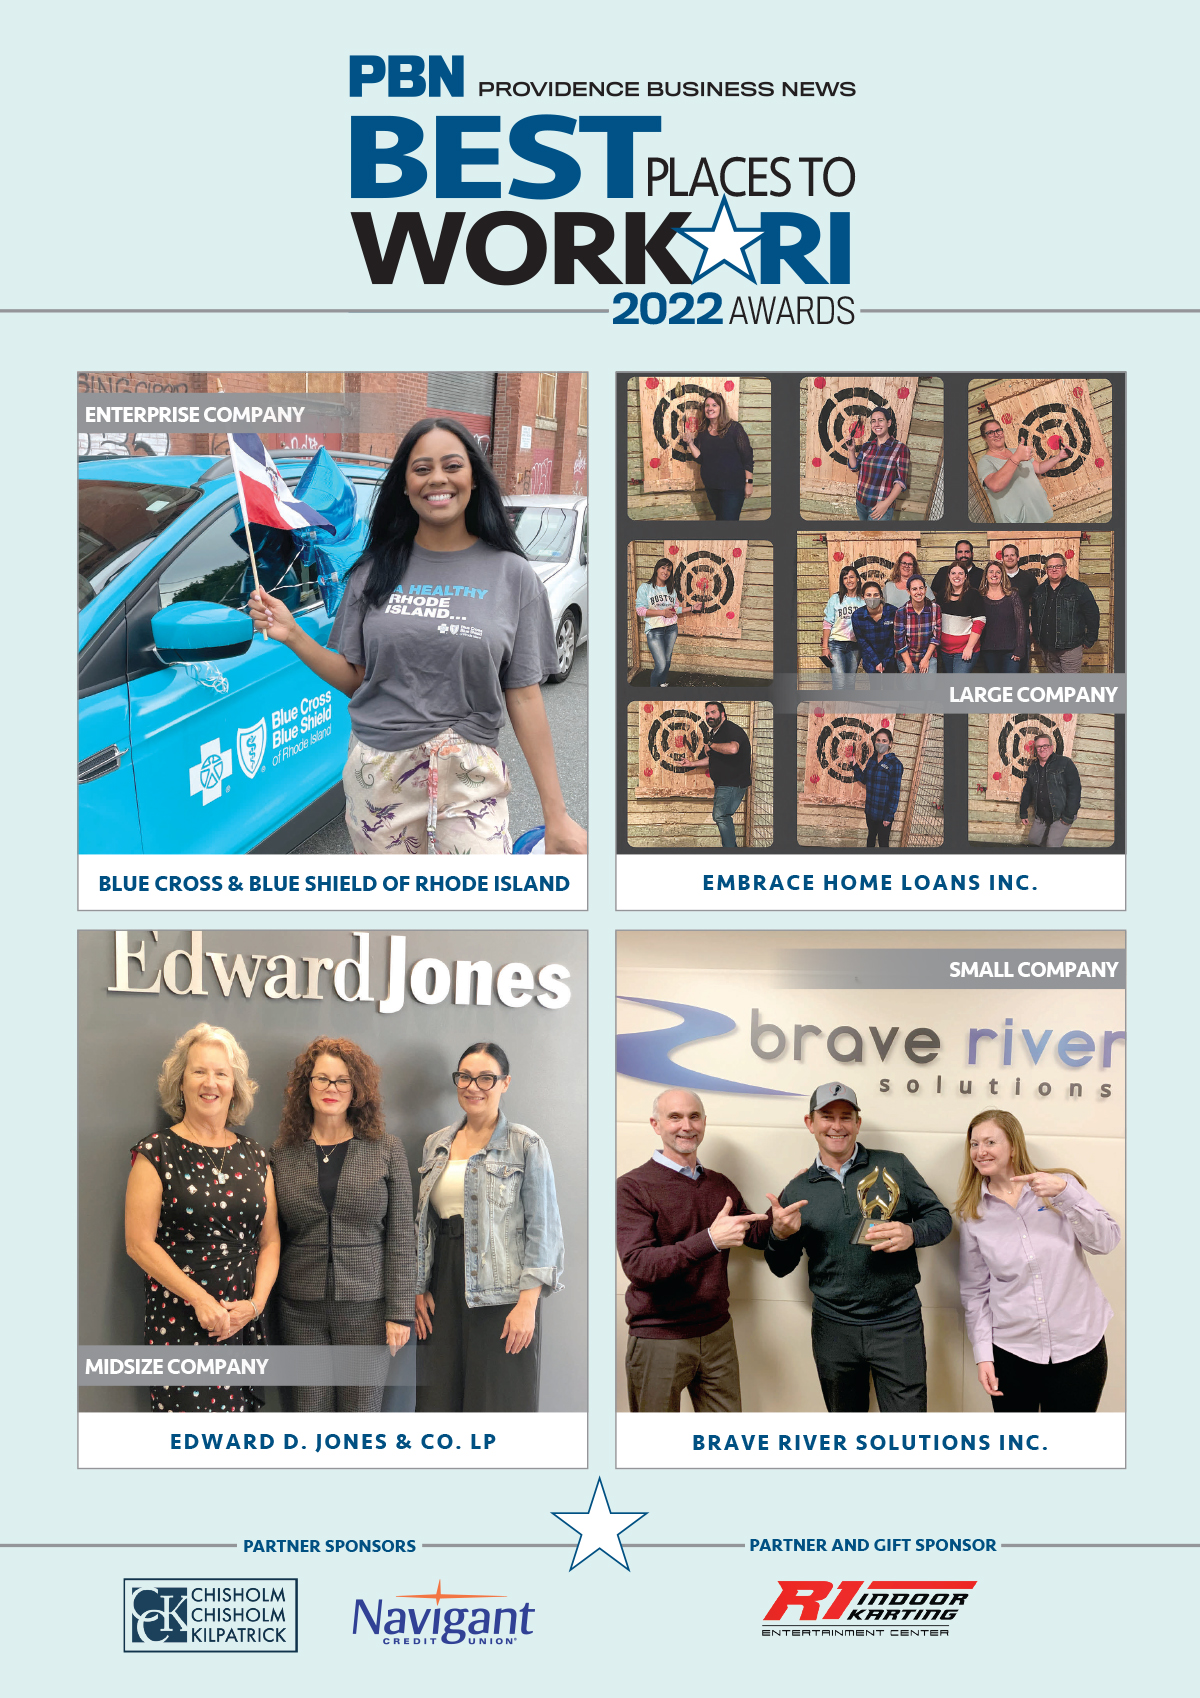 PBN Digital Issue Best Places to Work Awards 2022